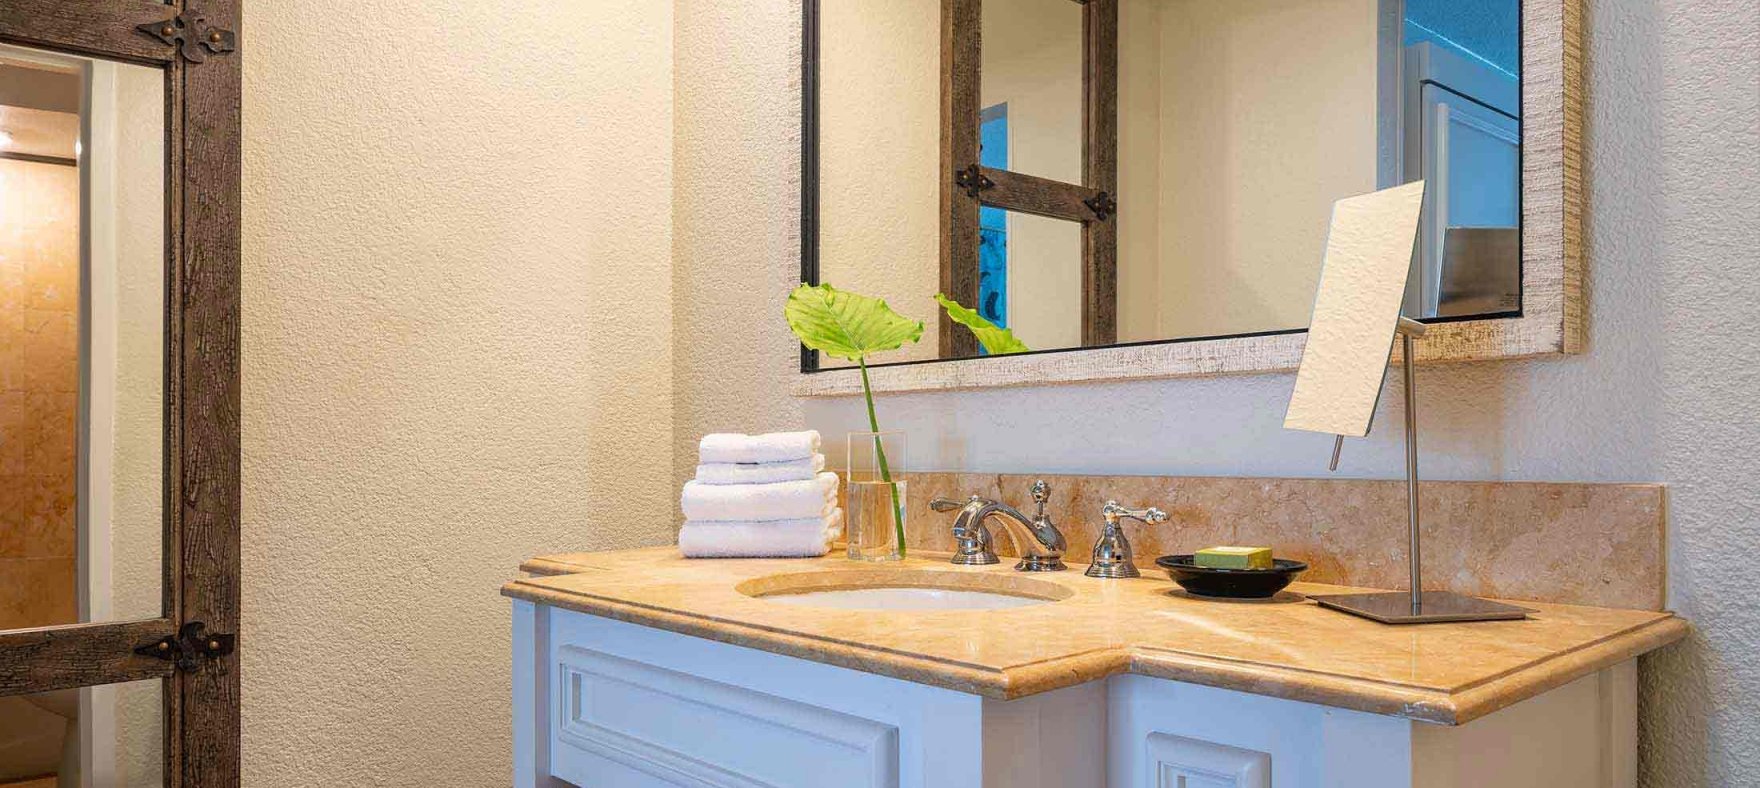 Stacked towels, and a vanity mirror placed on a spacious bathroom countertop with wooden shelves under a wide mirror